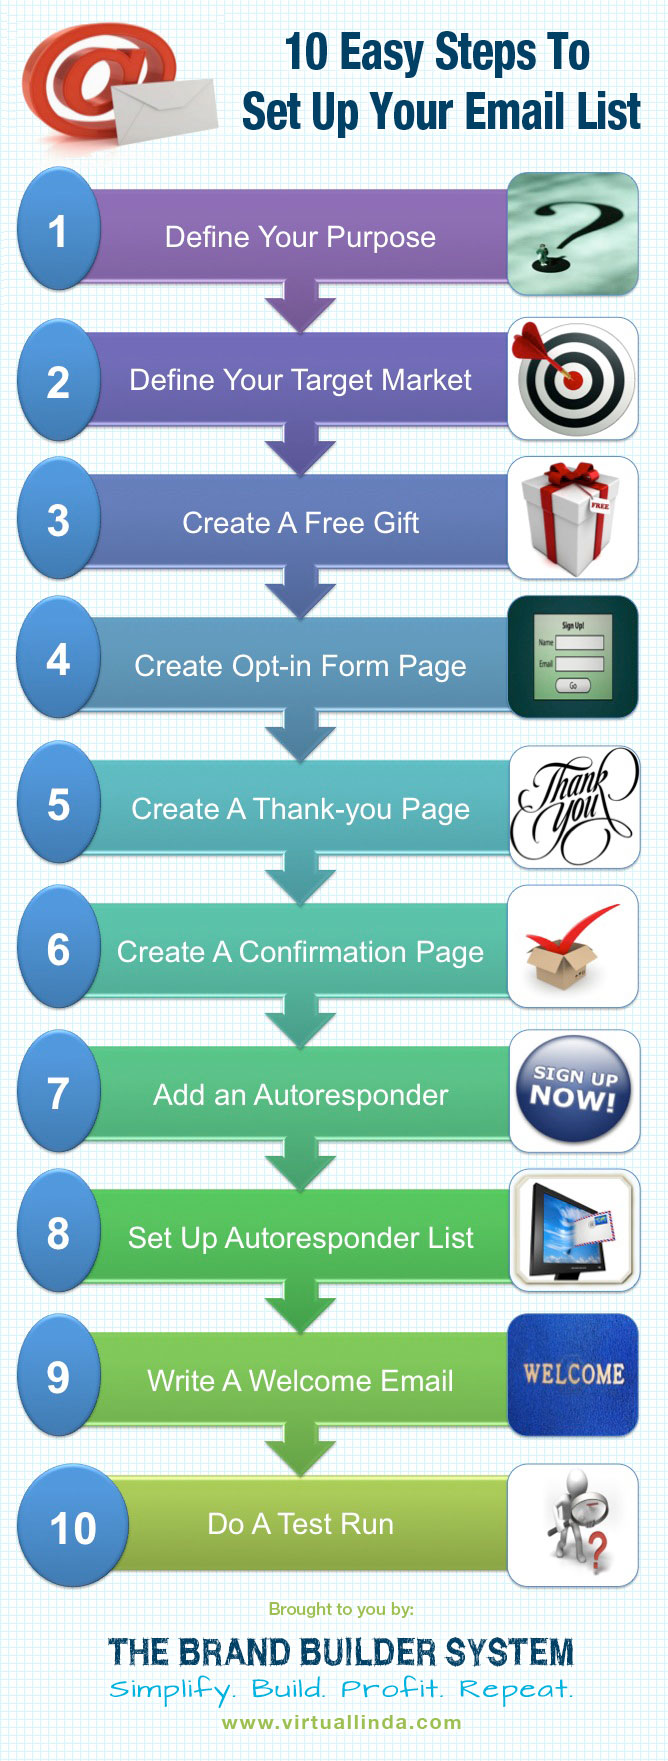 10 Easy Steps to Setup Your Email List [INFOGRAPHIC]